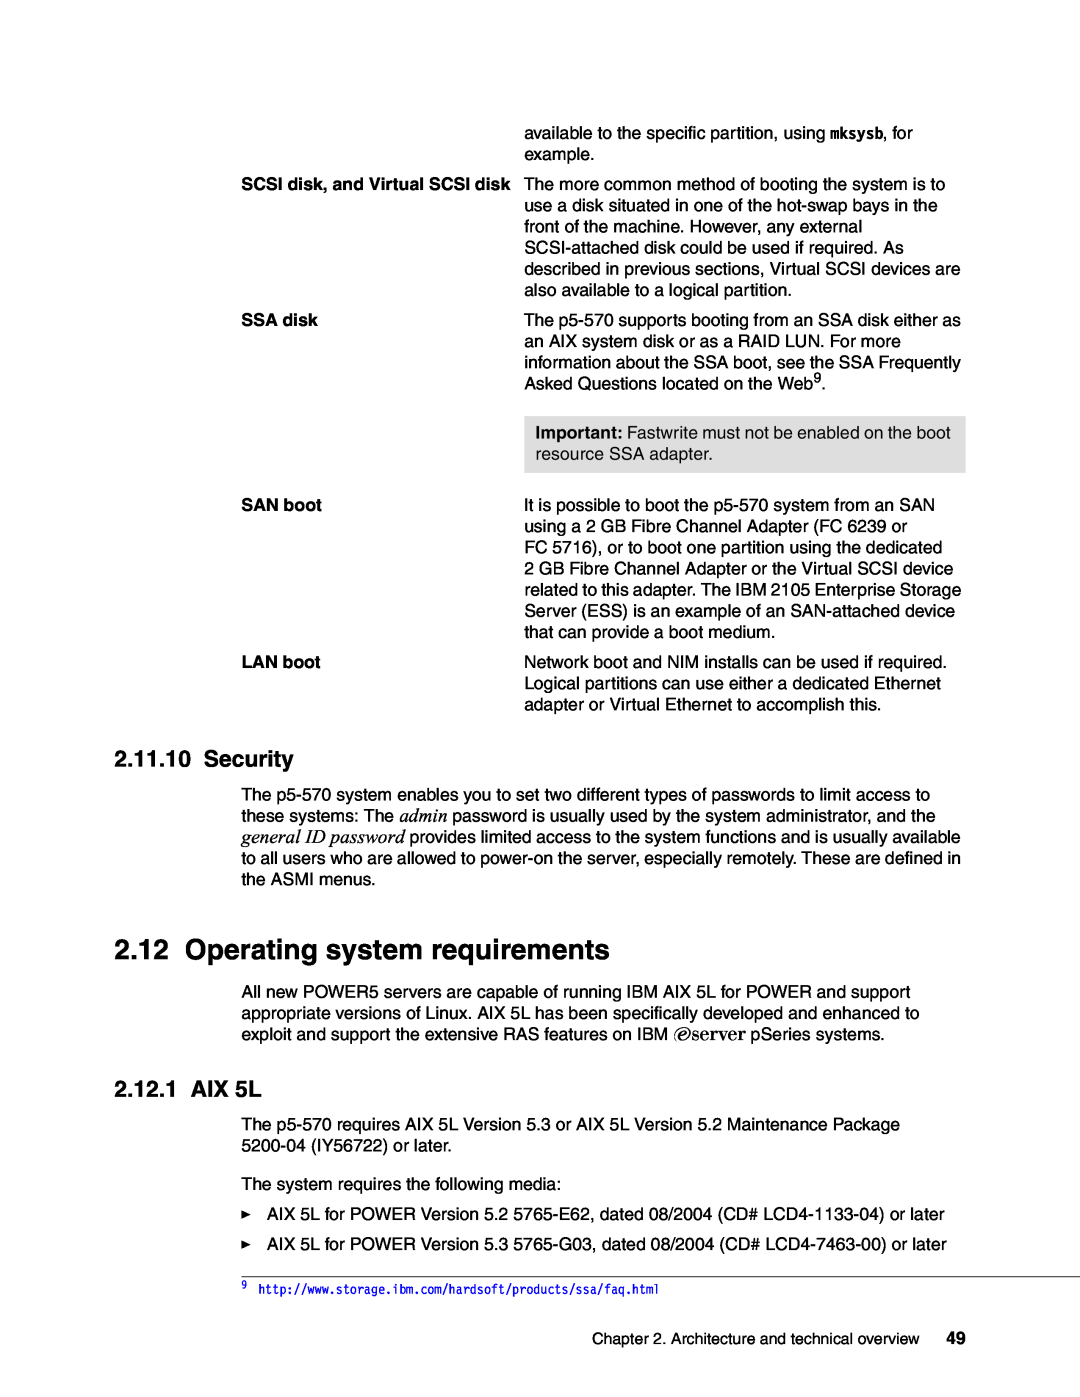 IBM P5 570 manual Operating system requirements, Security, AIX 5L, SSA disk, SAN boot, LAN boot 